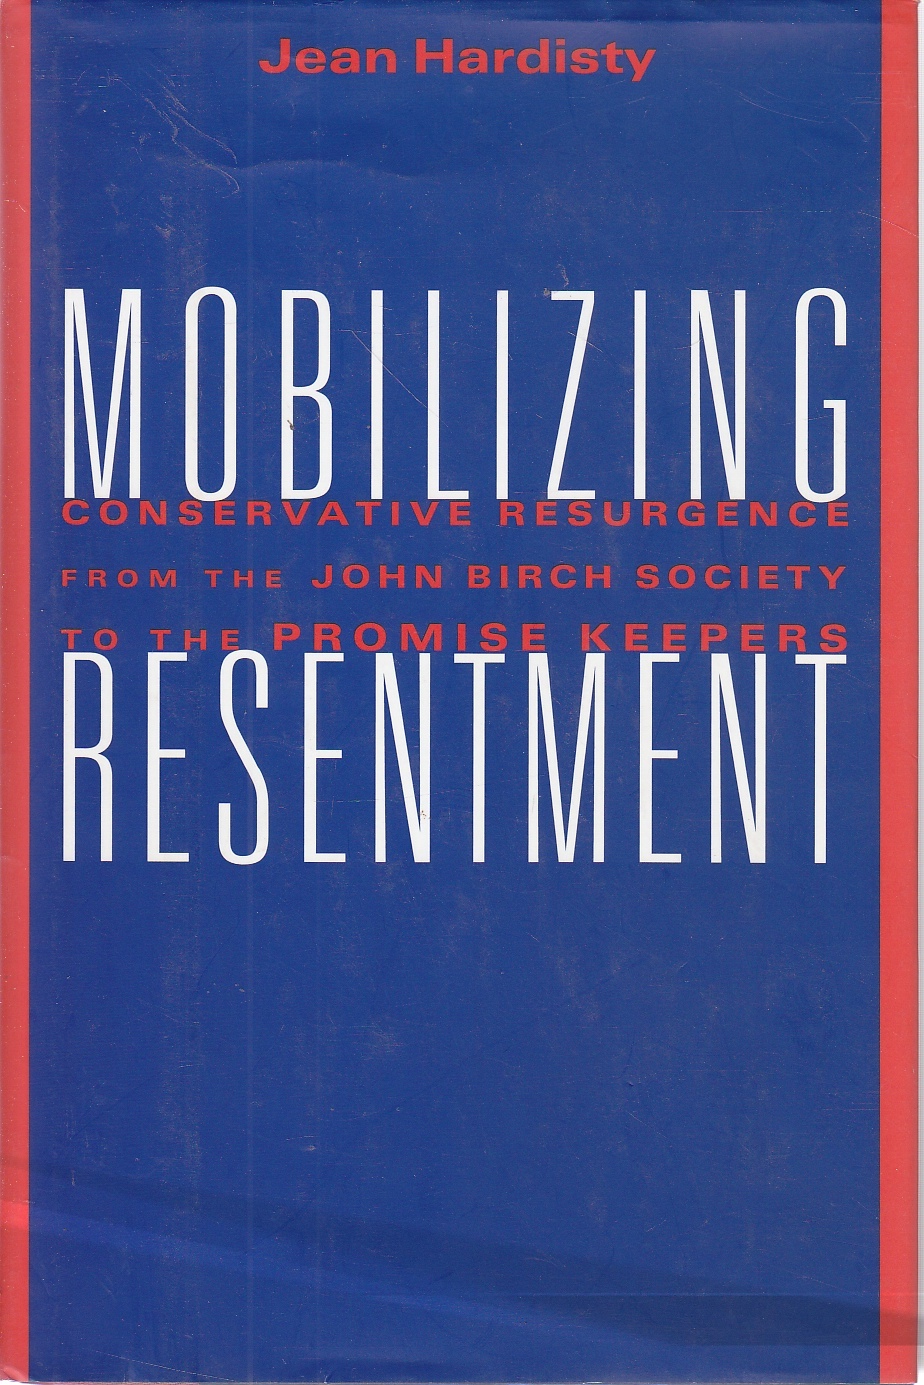 Image for Mobilizing Resentment Conservative Resurgence from the John Birch Society to the Promise Keepers